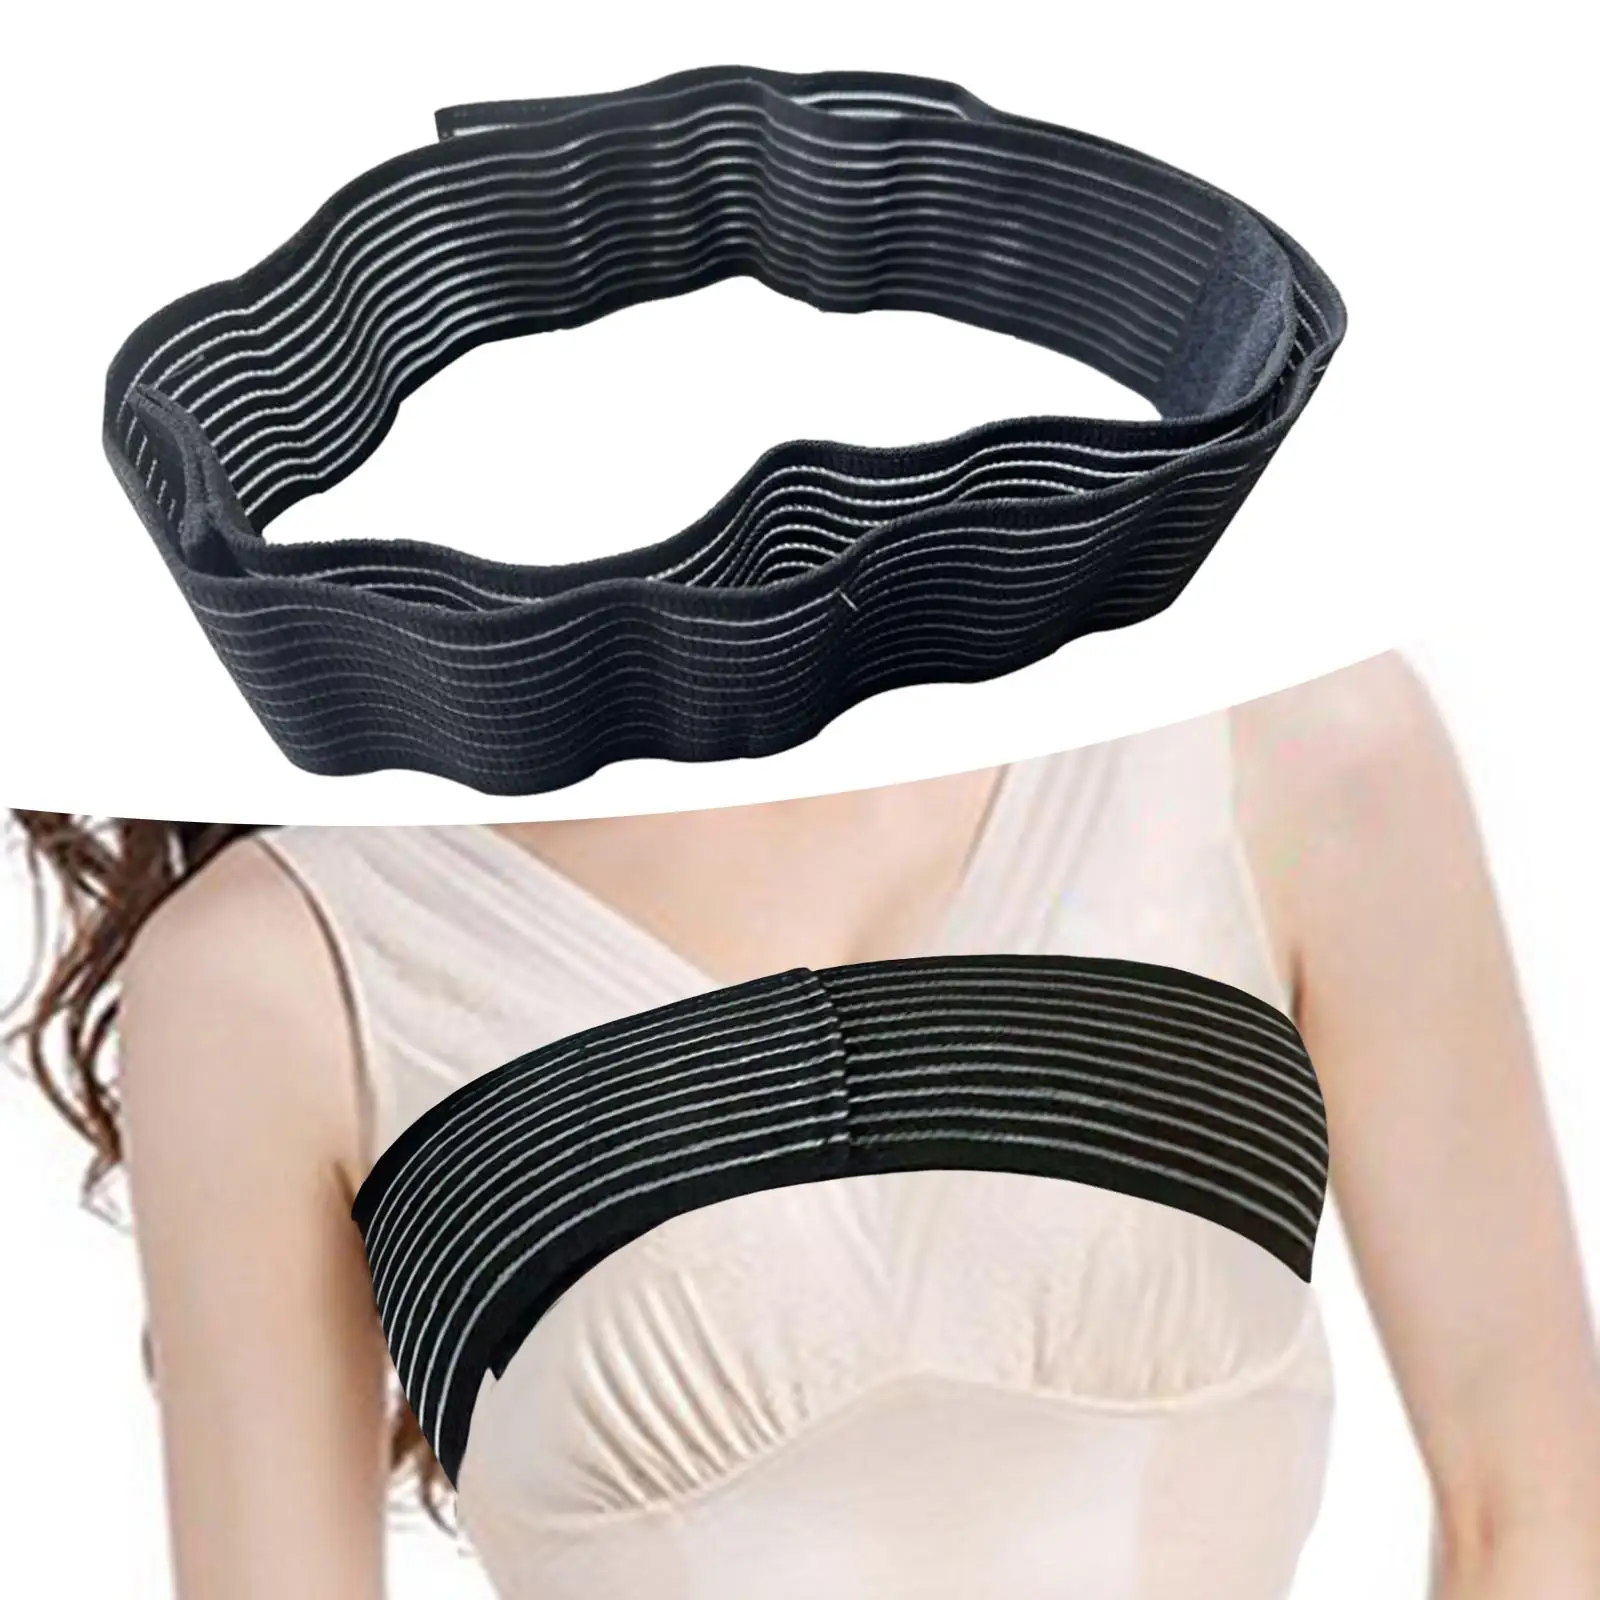 Breast Compression Band, Breast Support Band for Women, Elastic Chest Belt for Gym Fitness Cycling